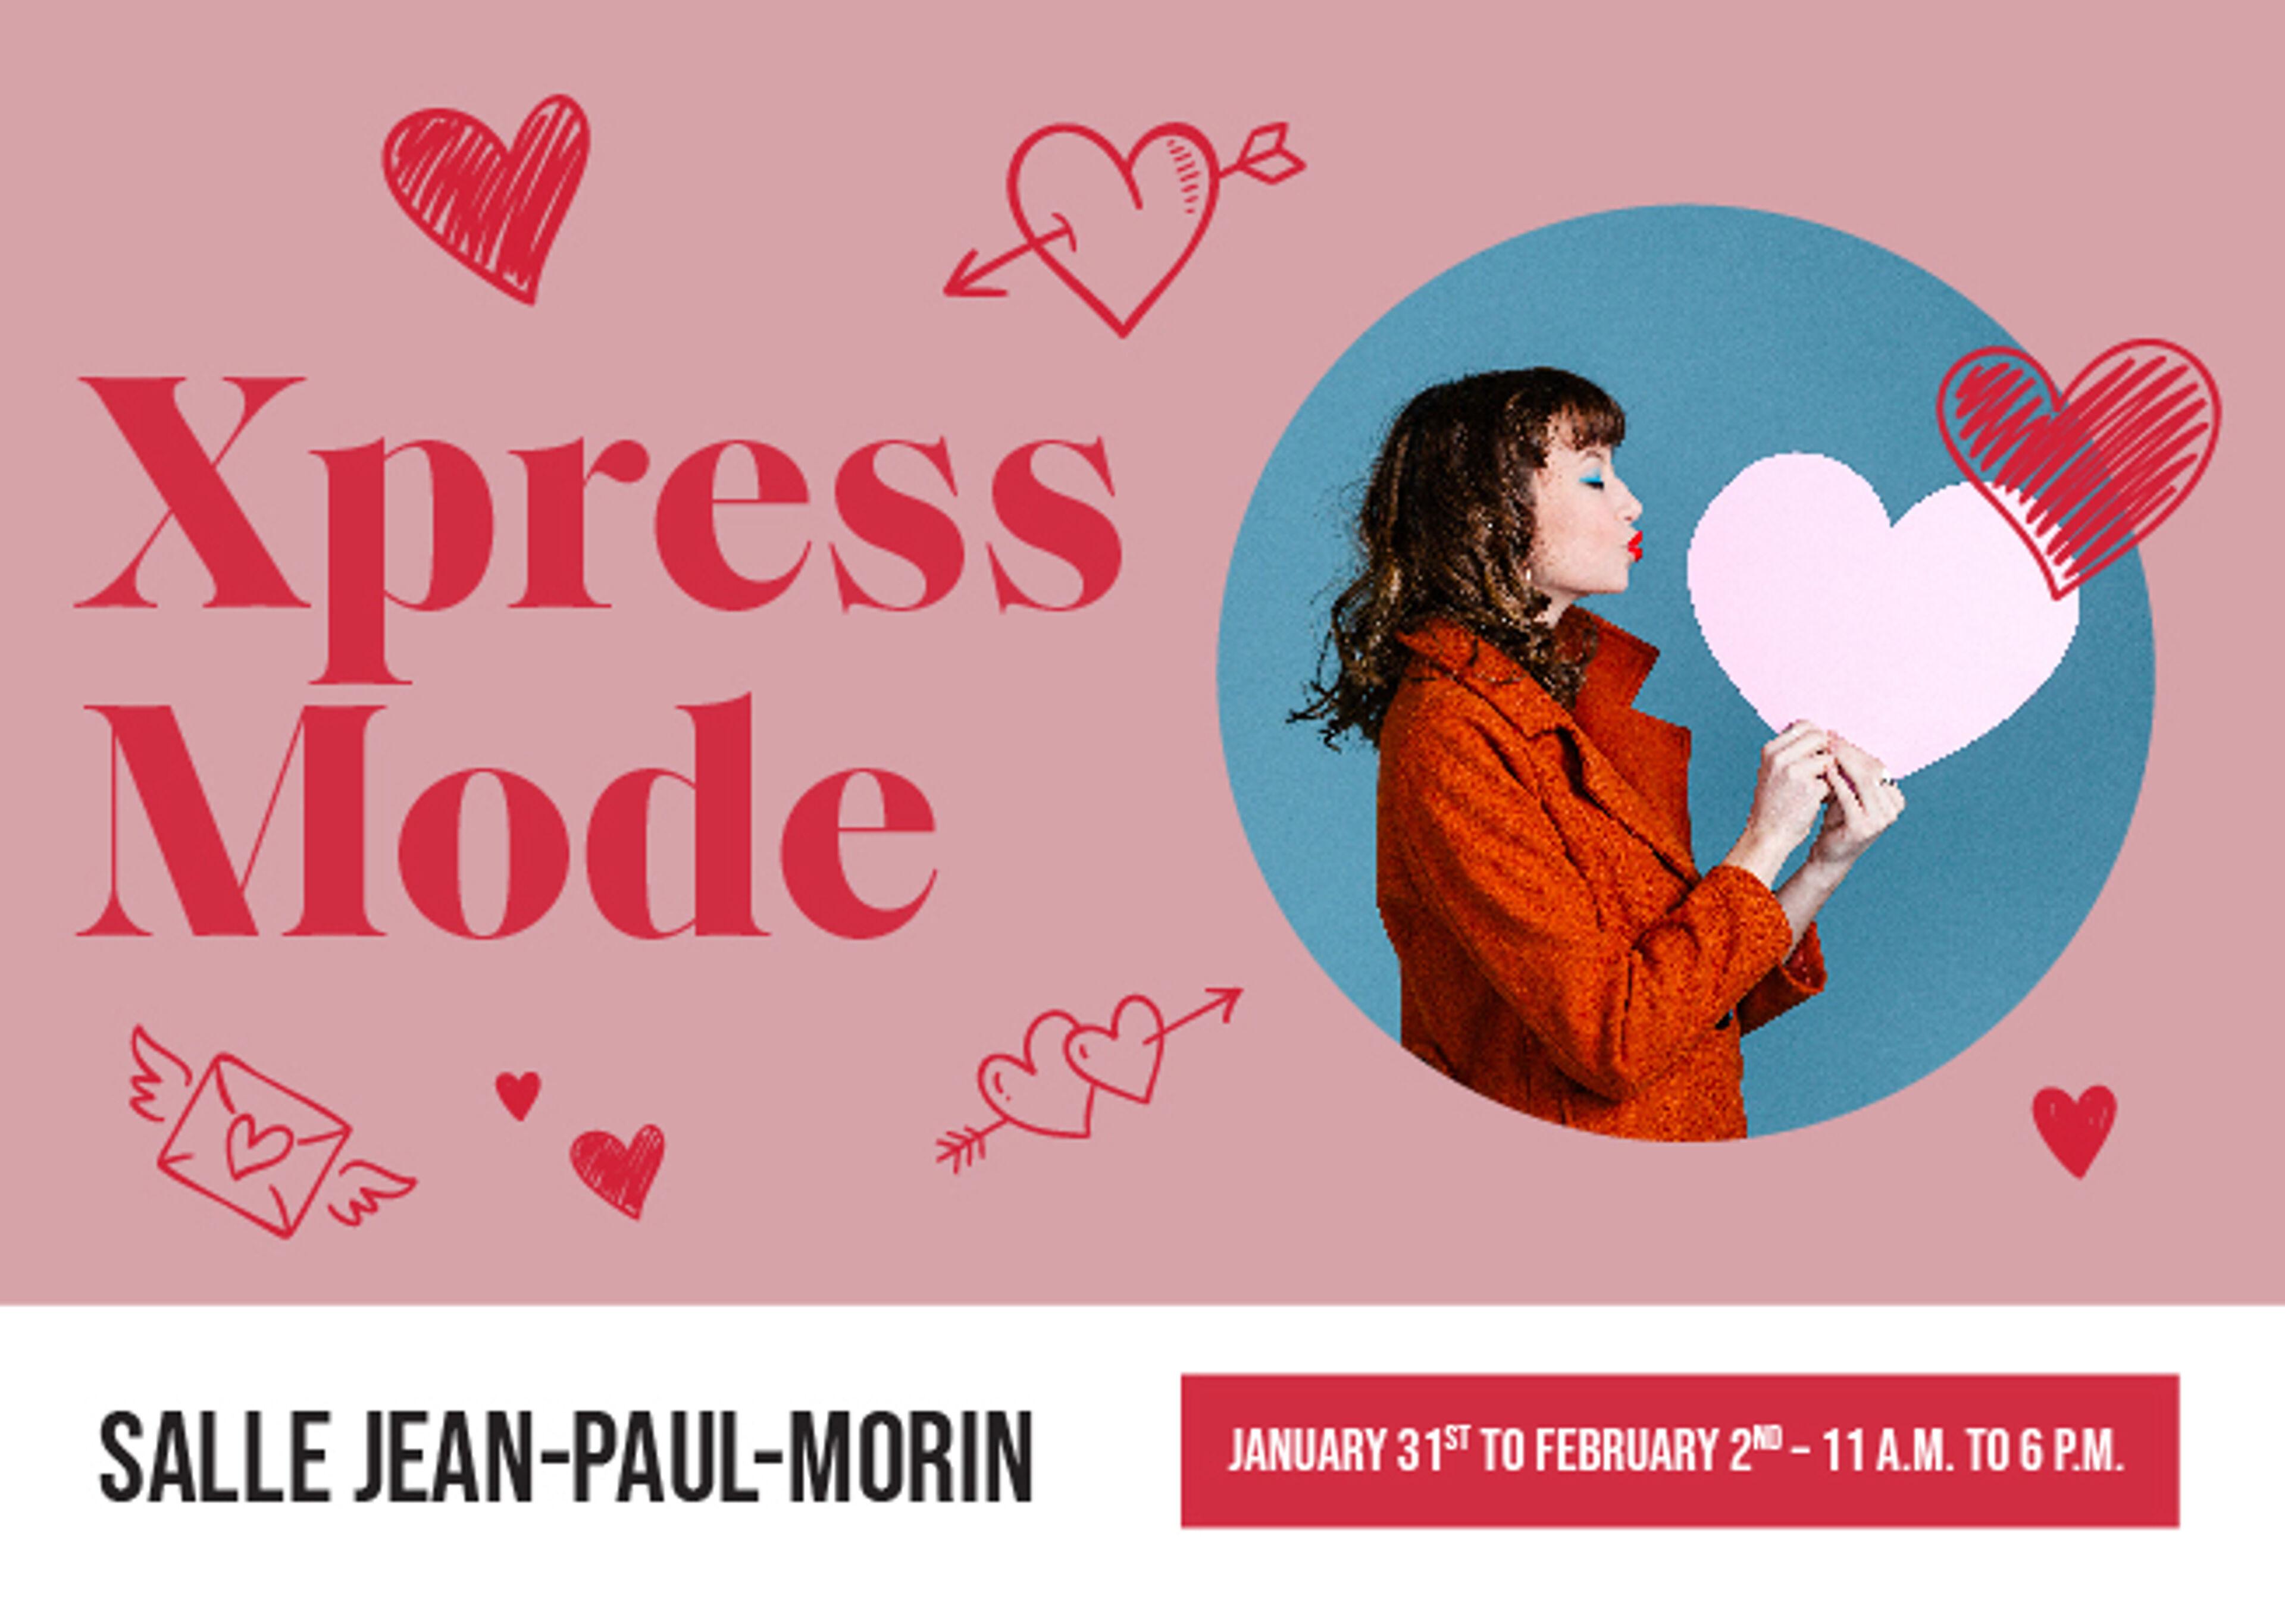 A poster with 'Xpress Mode' in large letters, a woman holding a heart shape, and event details, all on a pink background with heart doodles.